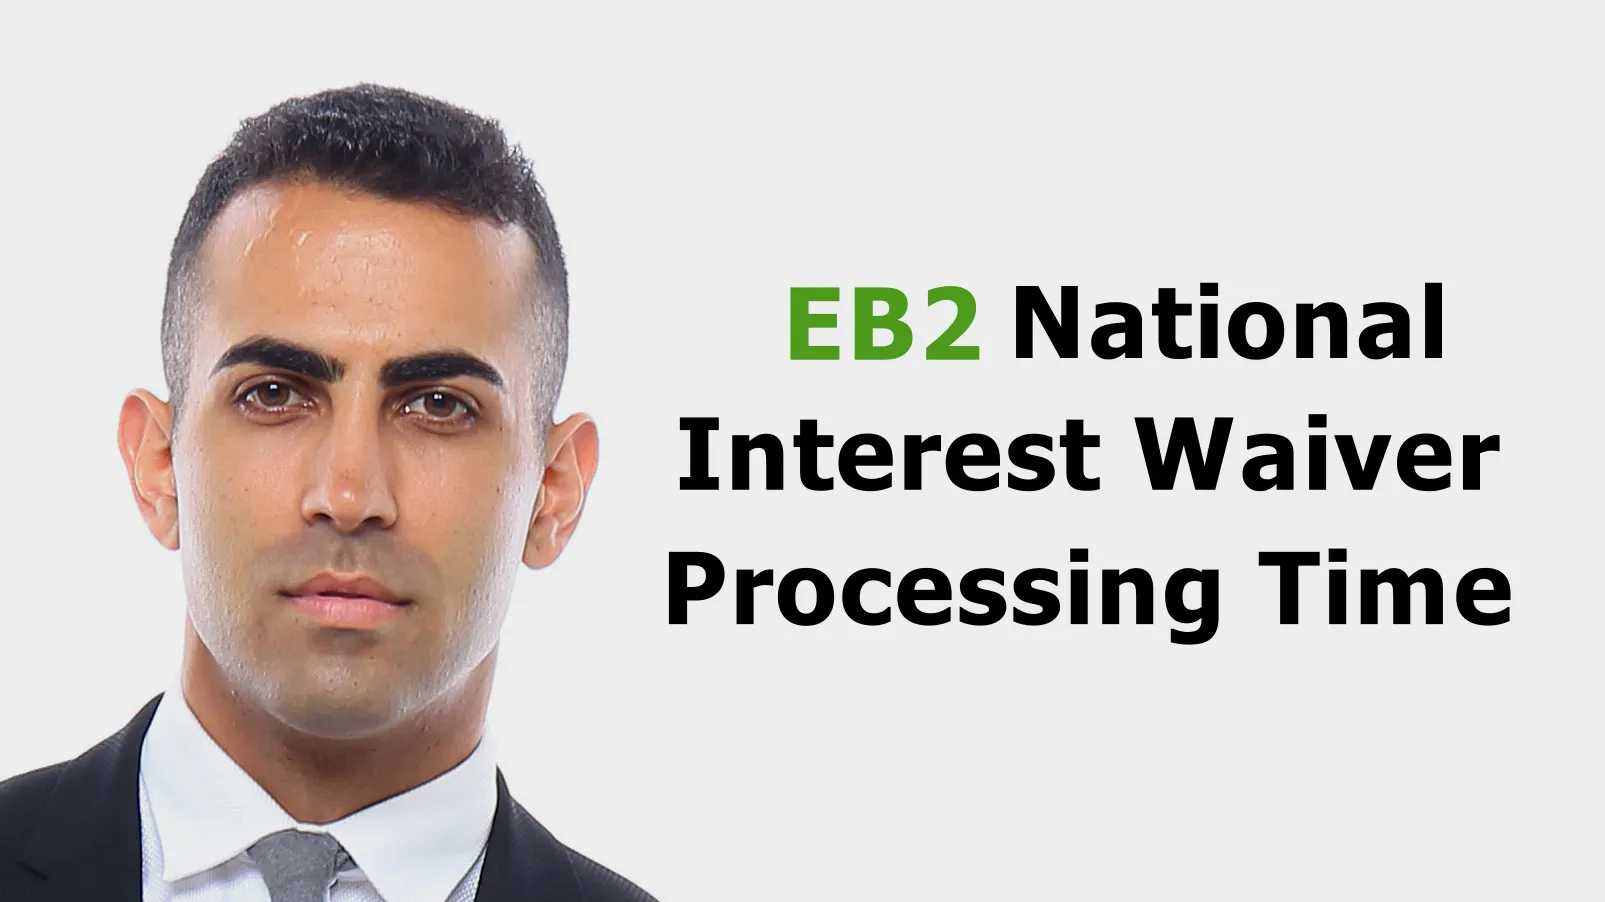 EB2 National Interest Waiver Processing Time